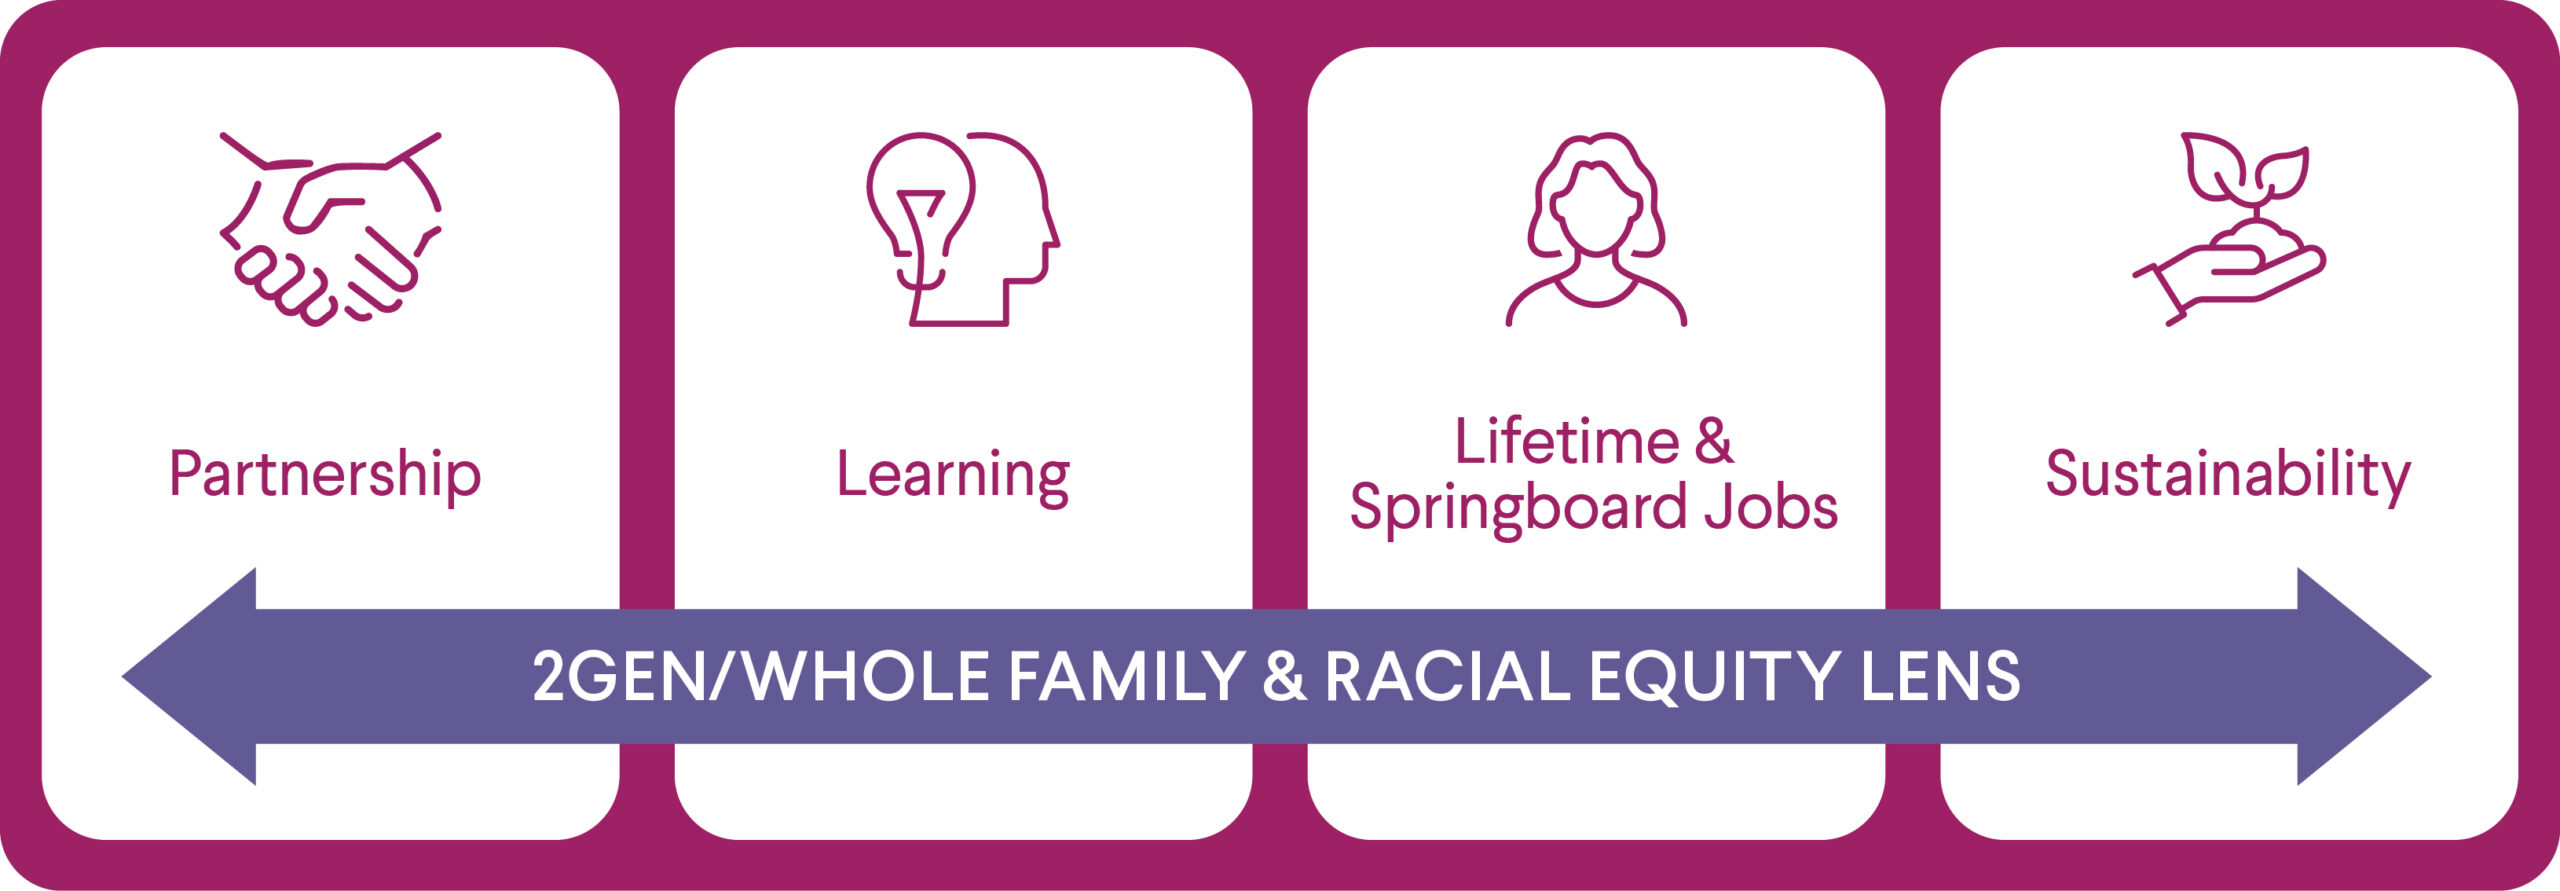 <img src="Tenents-1-scaled.jpg" alt="Partnerships, Learning, Lifetime & Springboard Jobs, and Sustainability are viewed through the 2Gen/Whole Family & Racial Equity Lens">